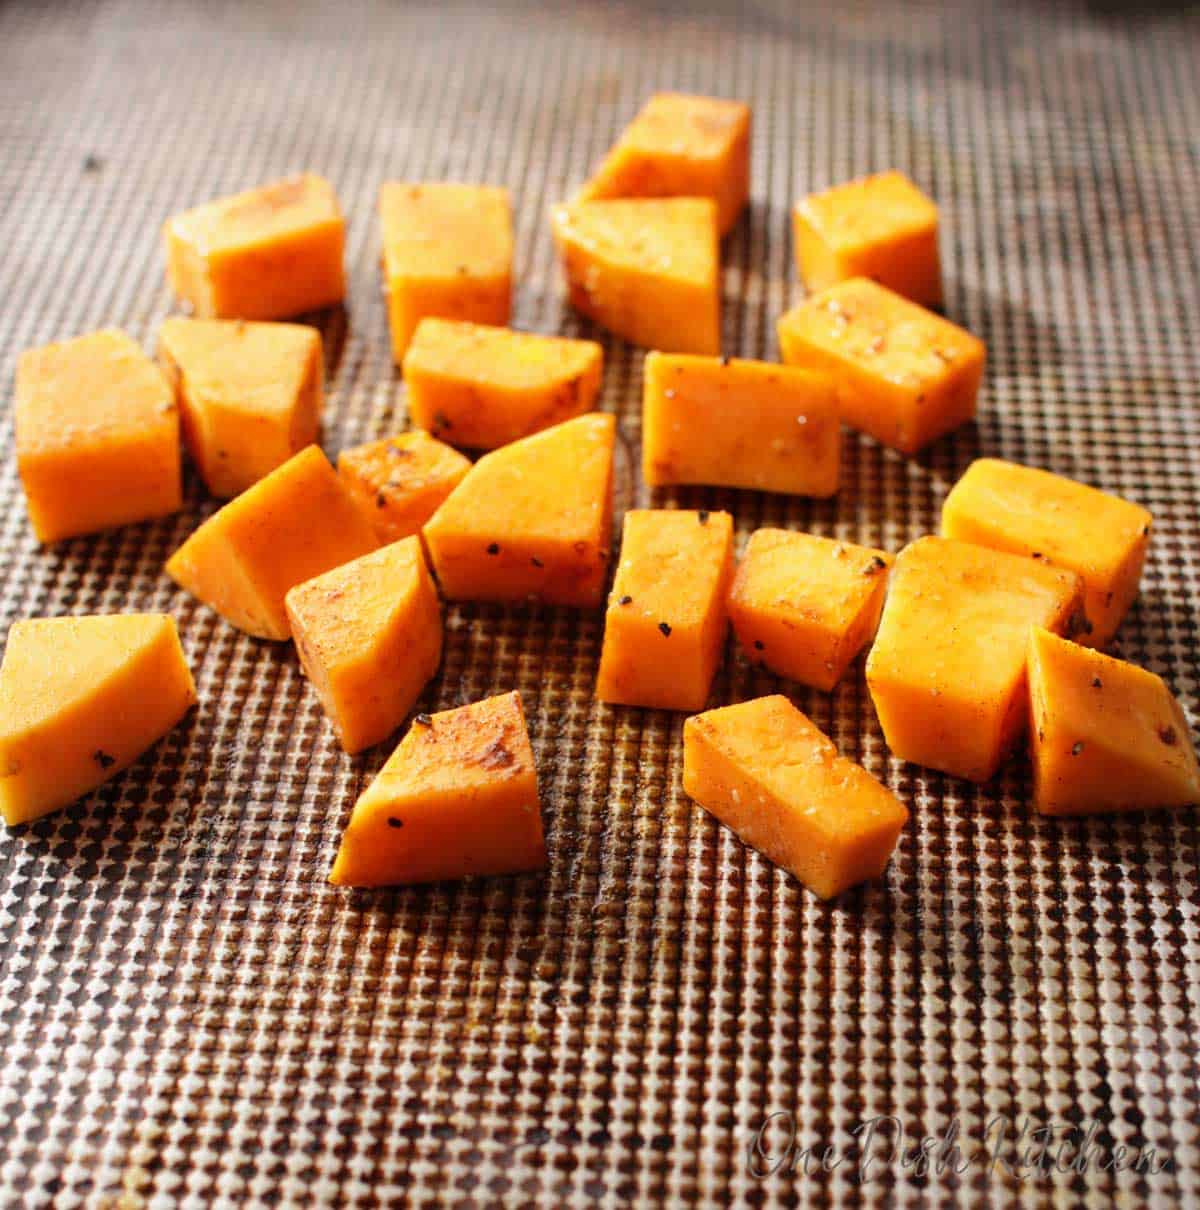 Cubed butternut squash seasoned on a baking sheet before roasting in the oven